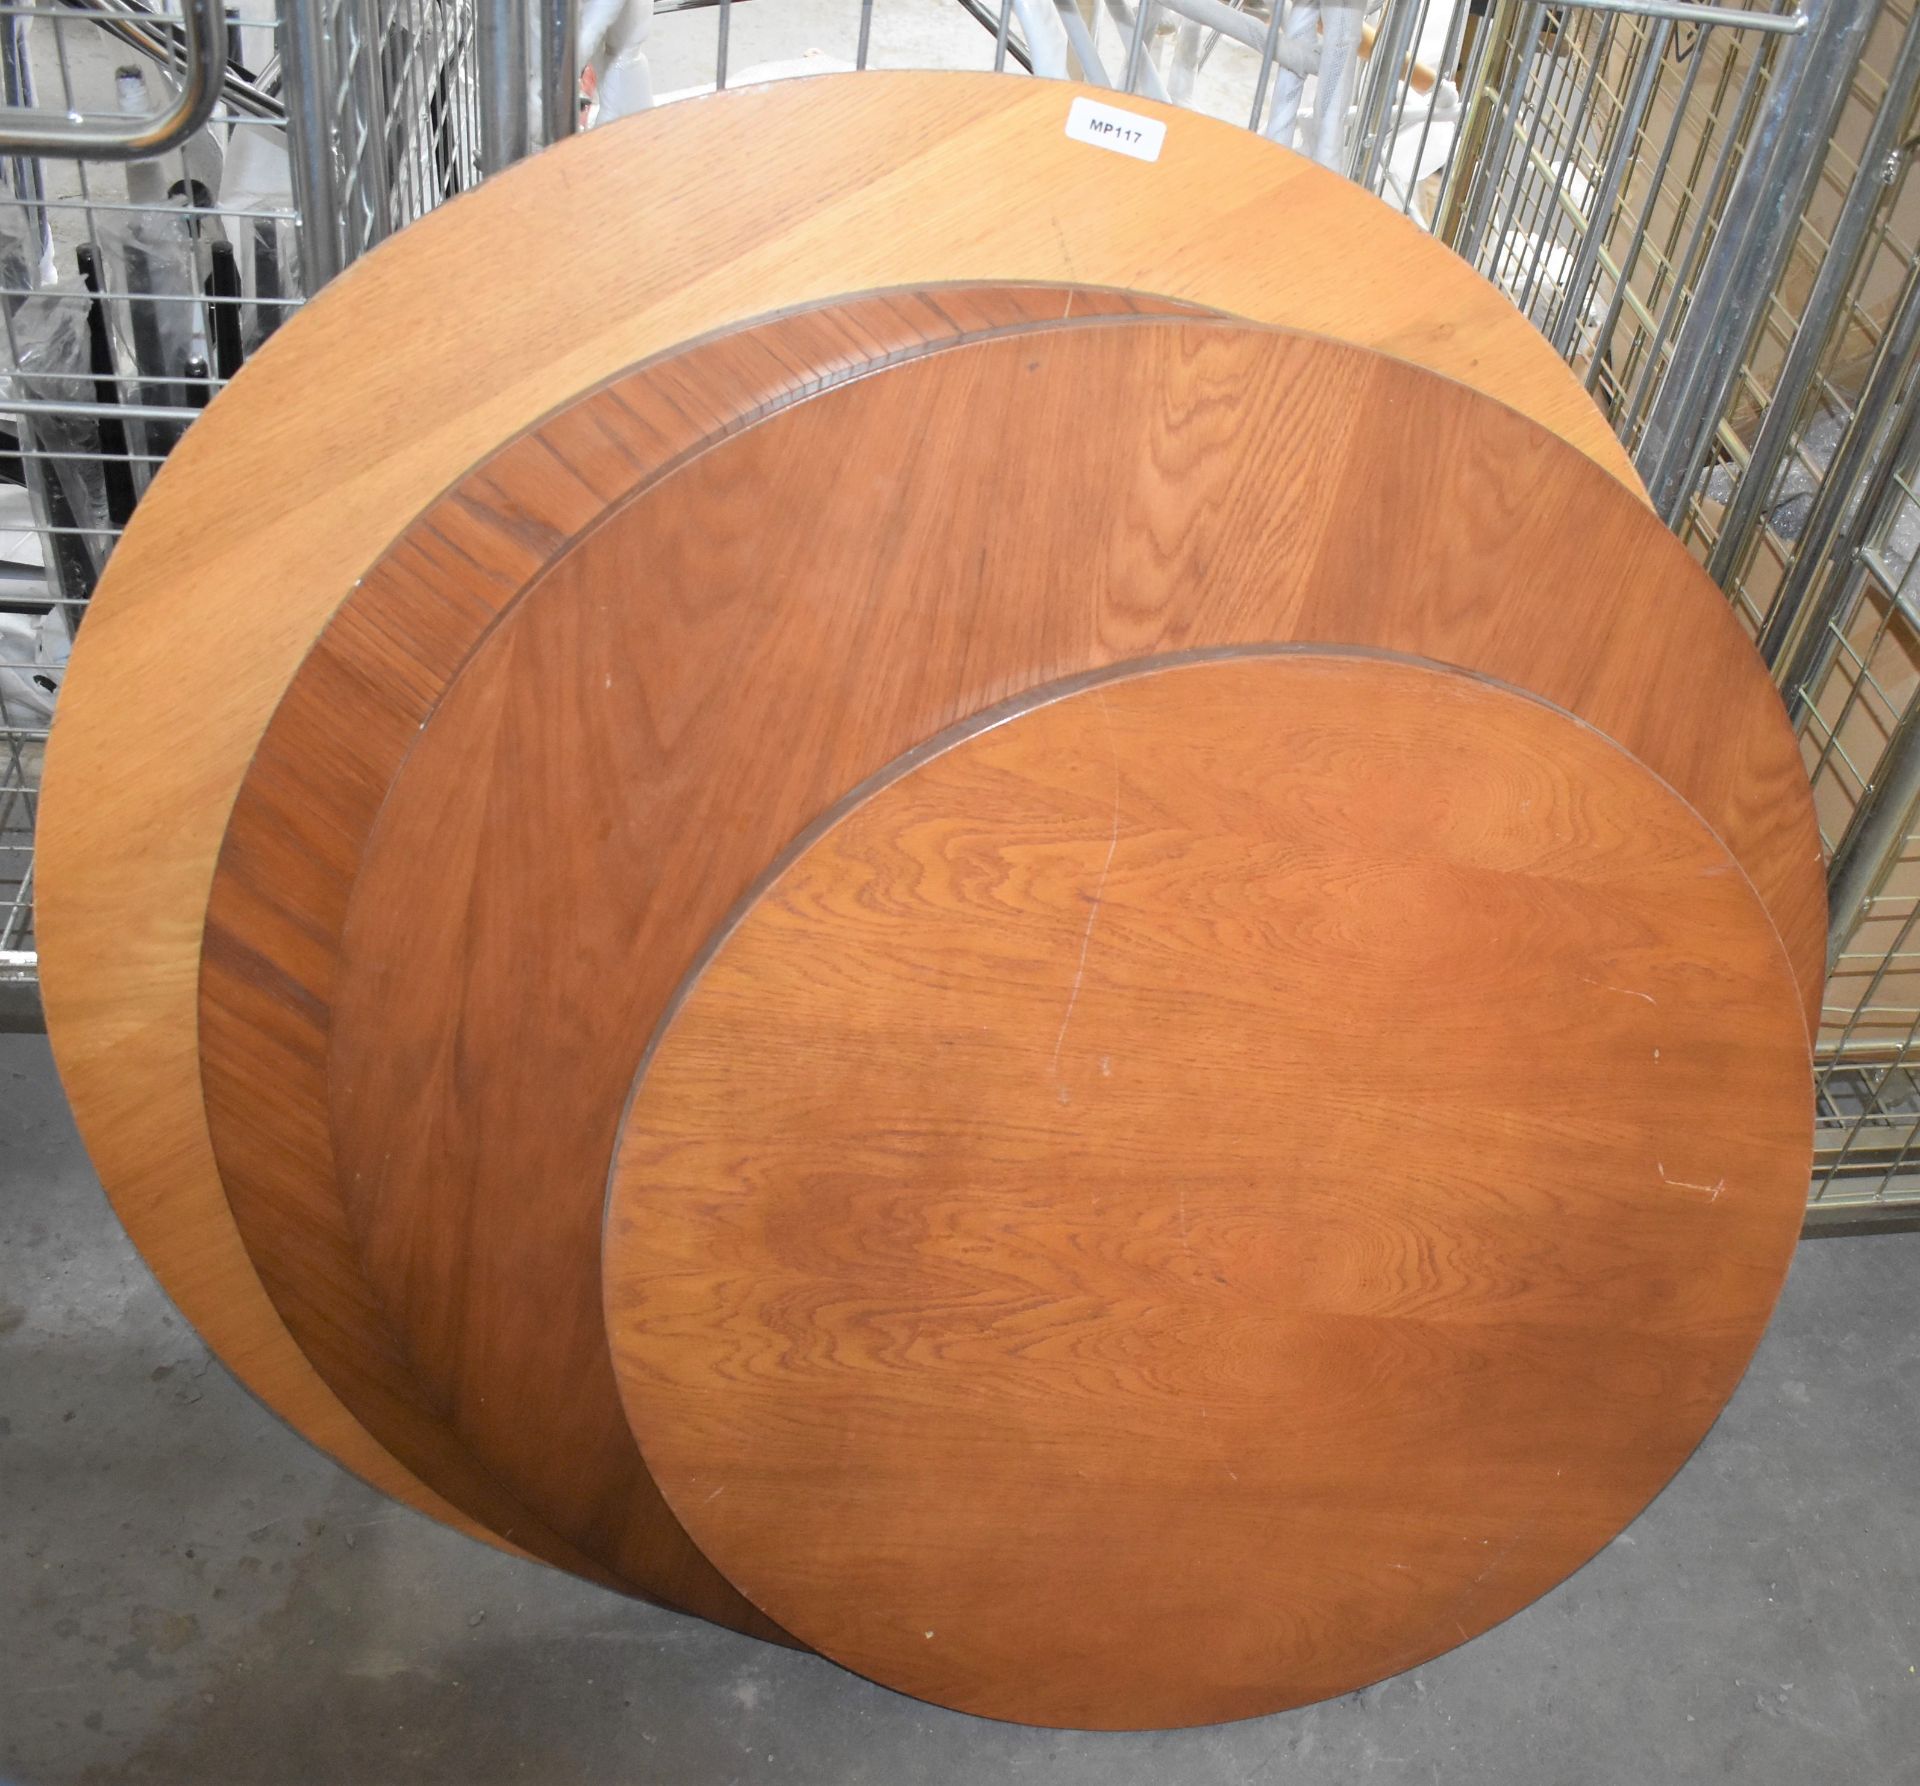 4 x Round Restaurant Dining Table Tops - Sizes Included 100cm, 100cm, 90cm and 75cm